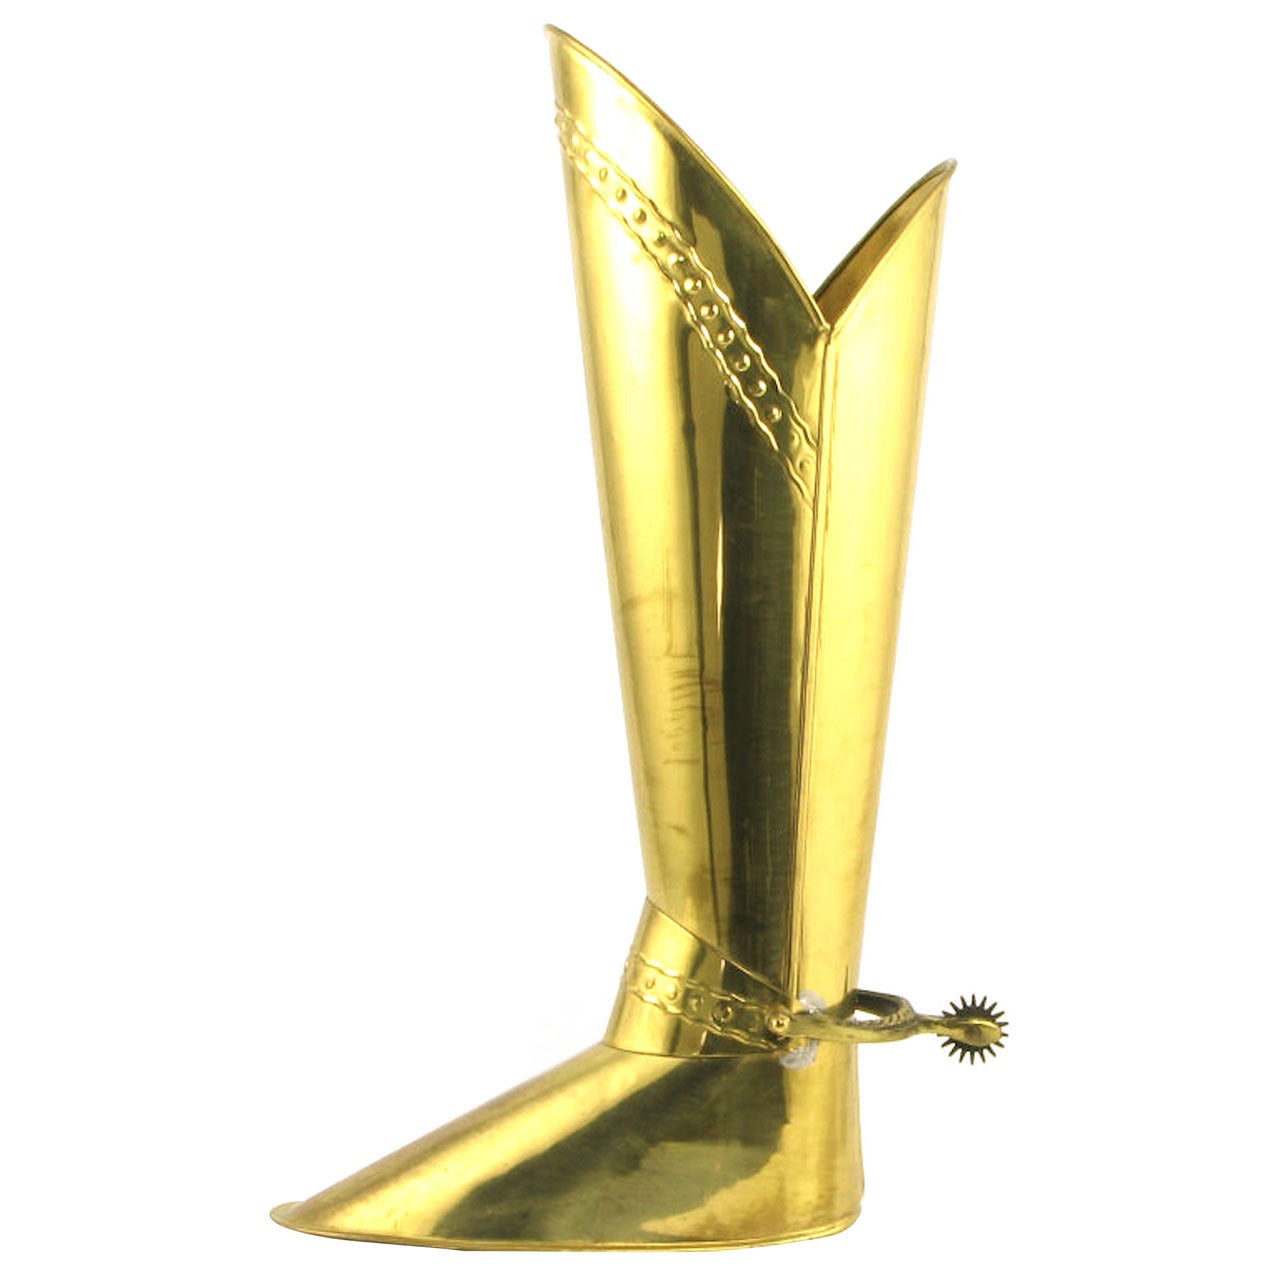 Circa 1930s English Spurred Brass Knight's Boot Umbrella Stand For Sale